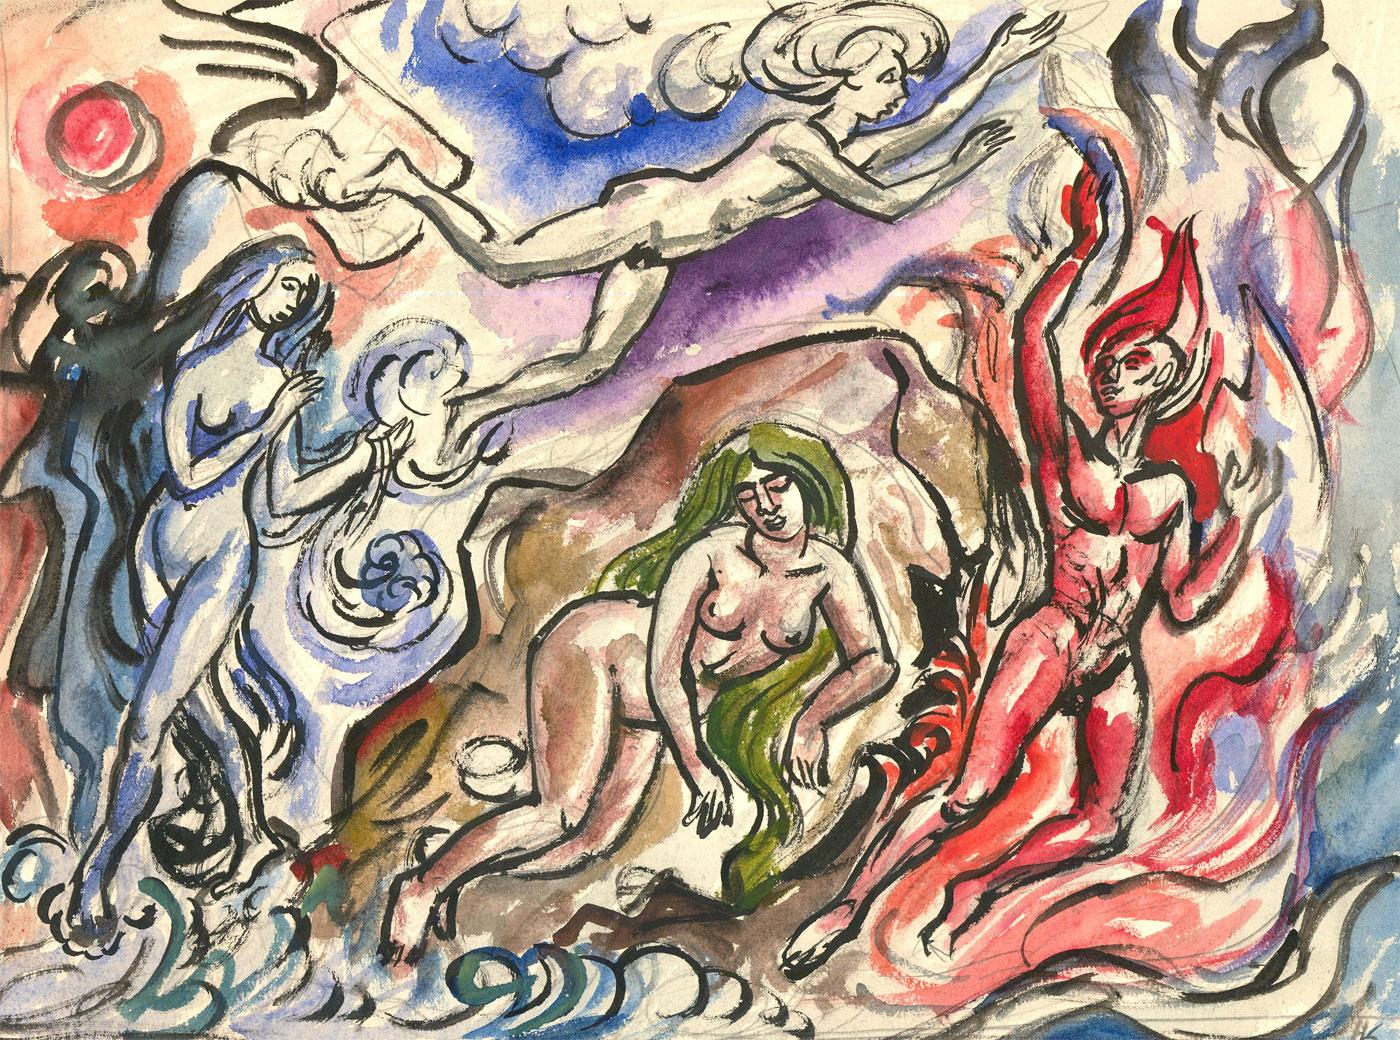 Unknown Nude – Helen Steinthal (1911-1991) – Zweiseitiges Aquarell, Towards the Flames